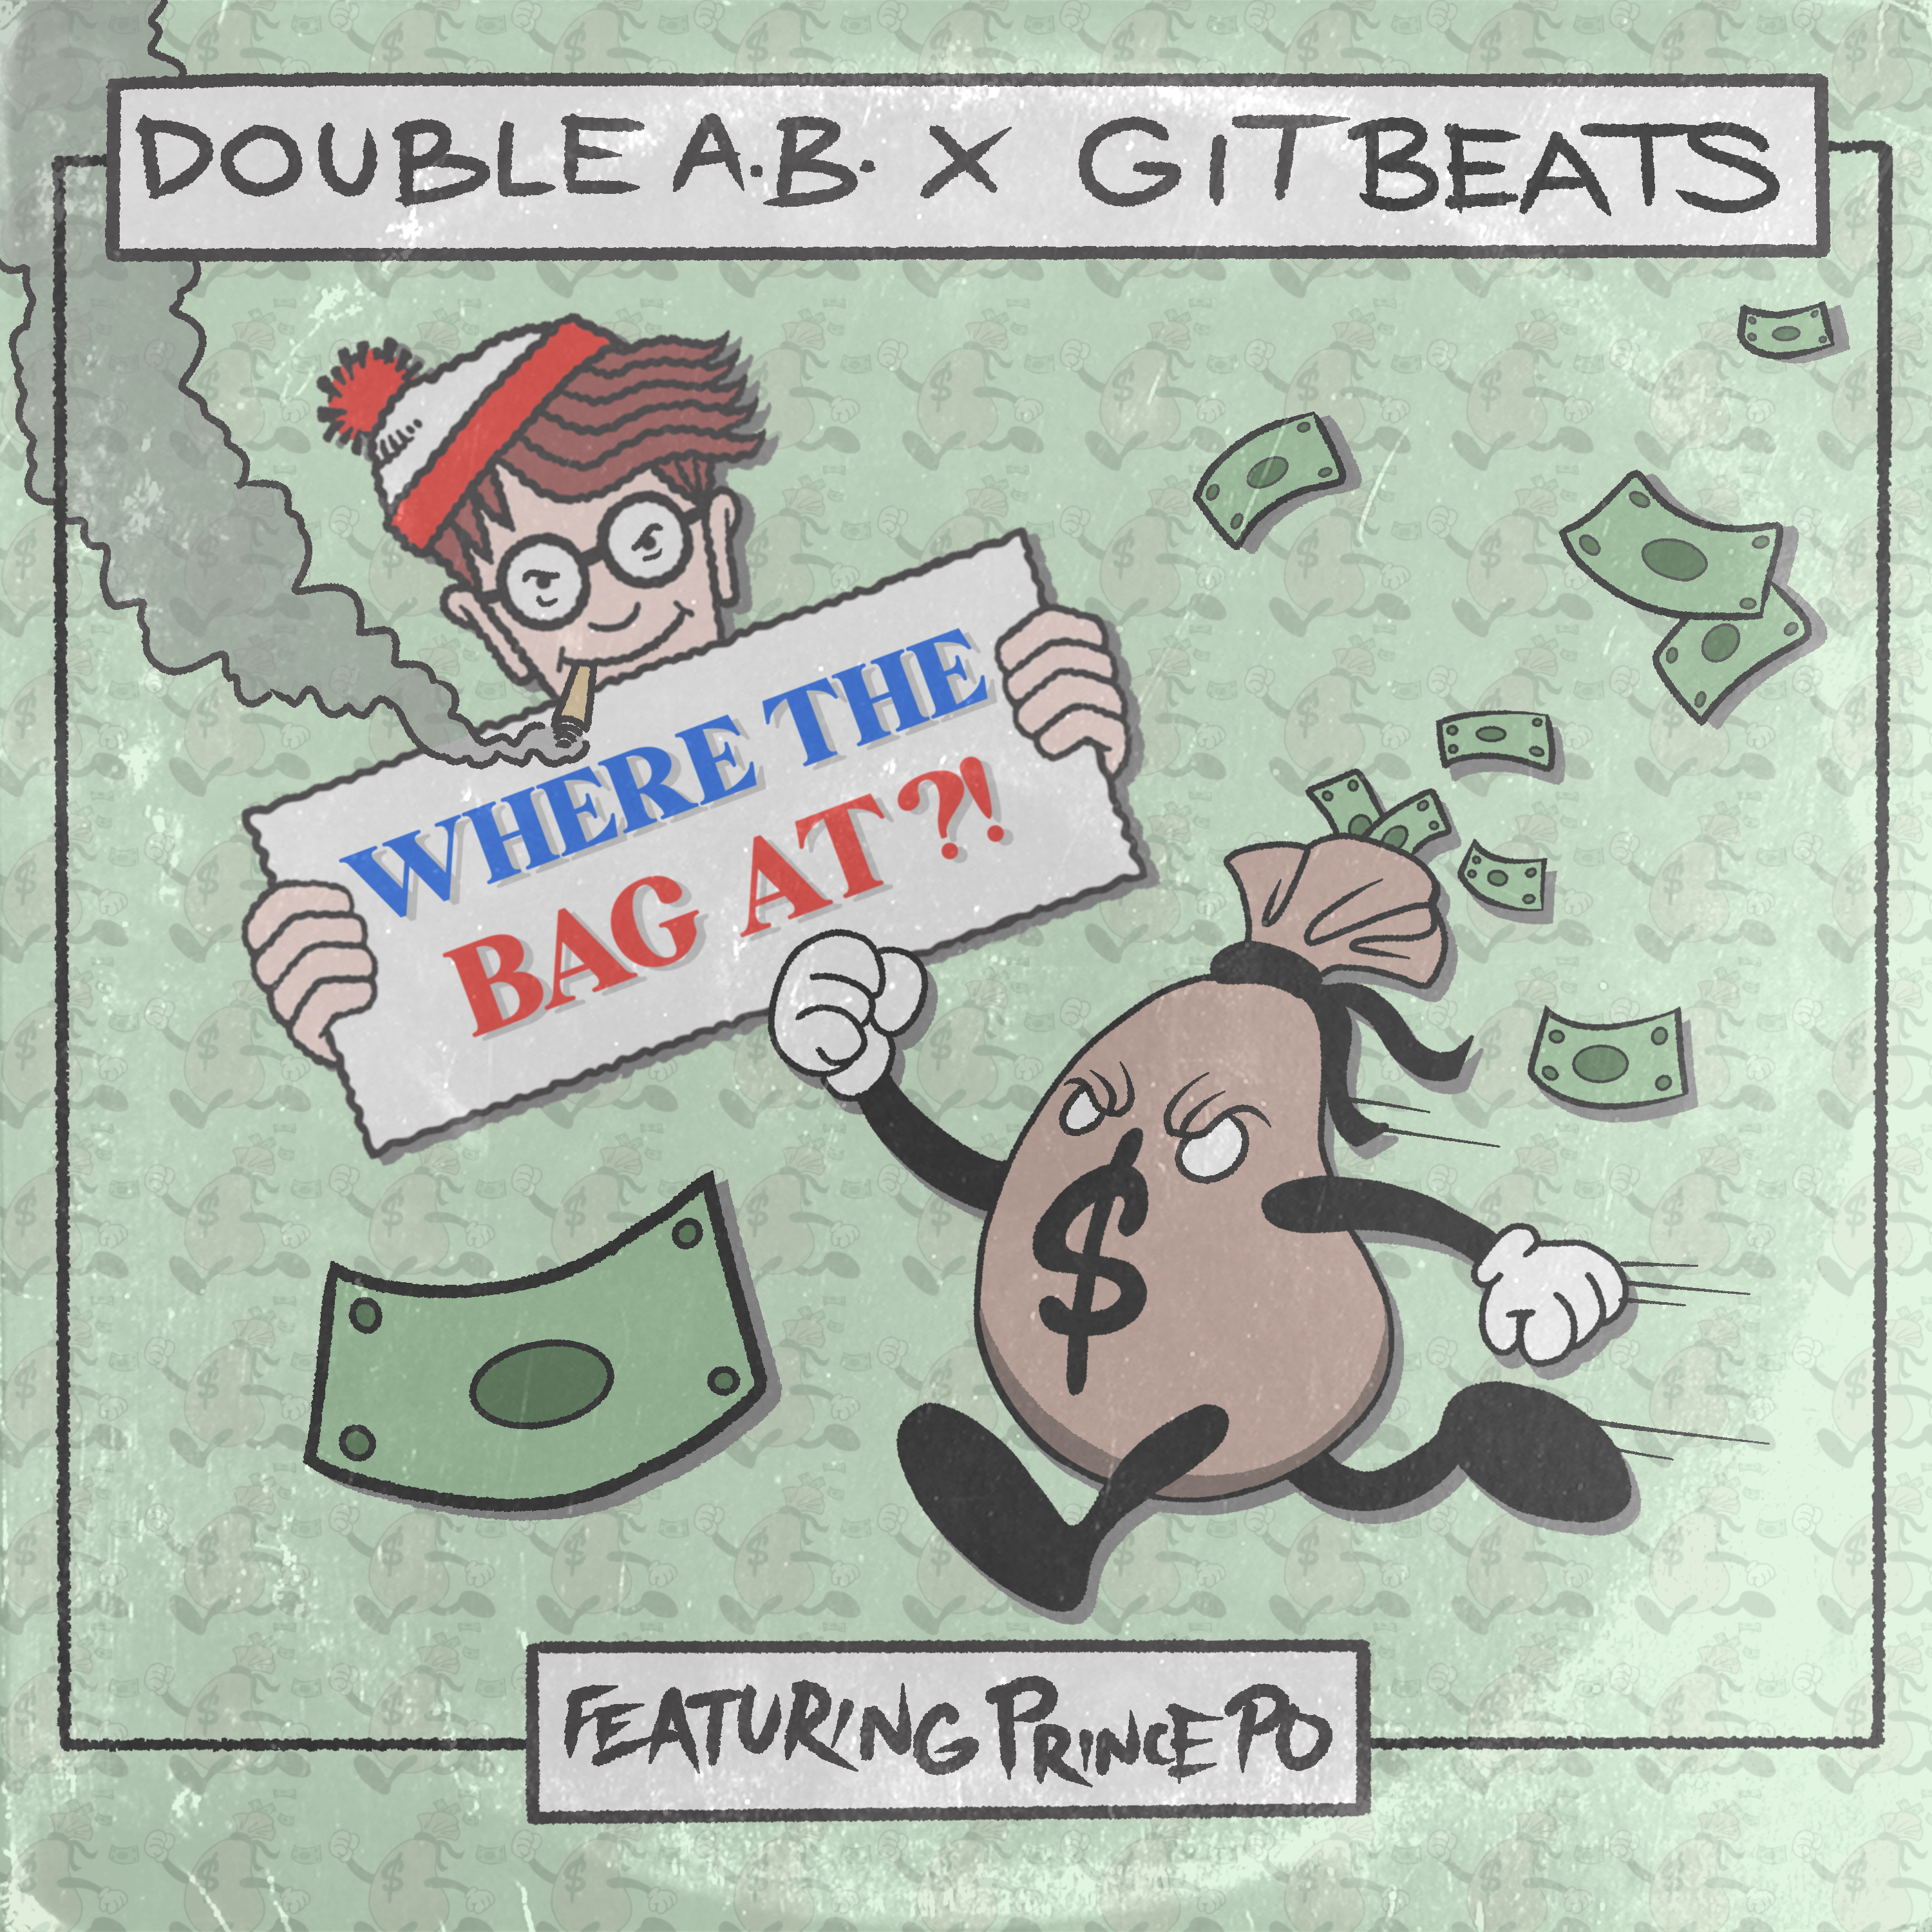 Double A.B. & Git Beats - Where the Bag At?! feat. Prince Po